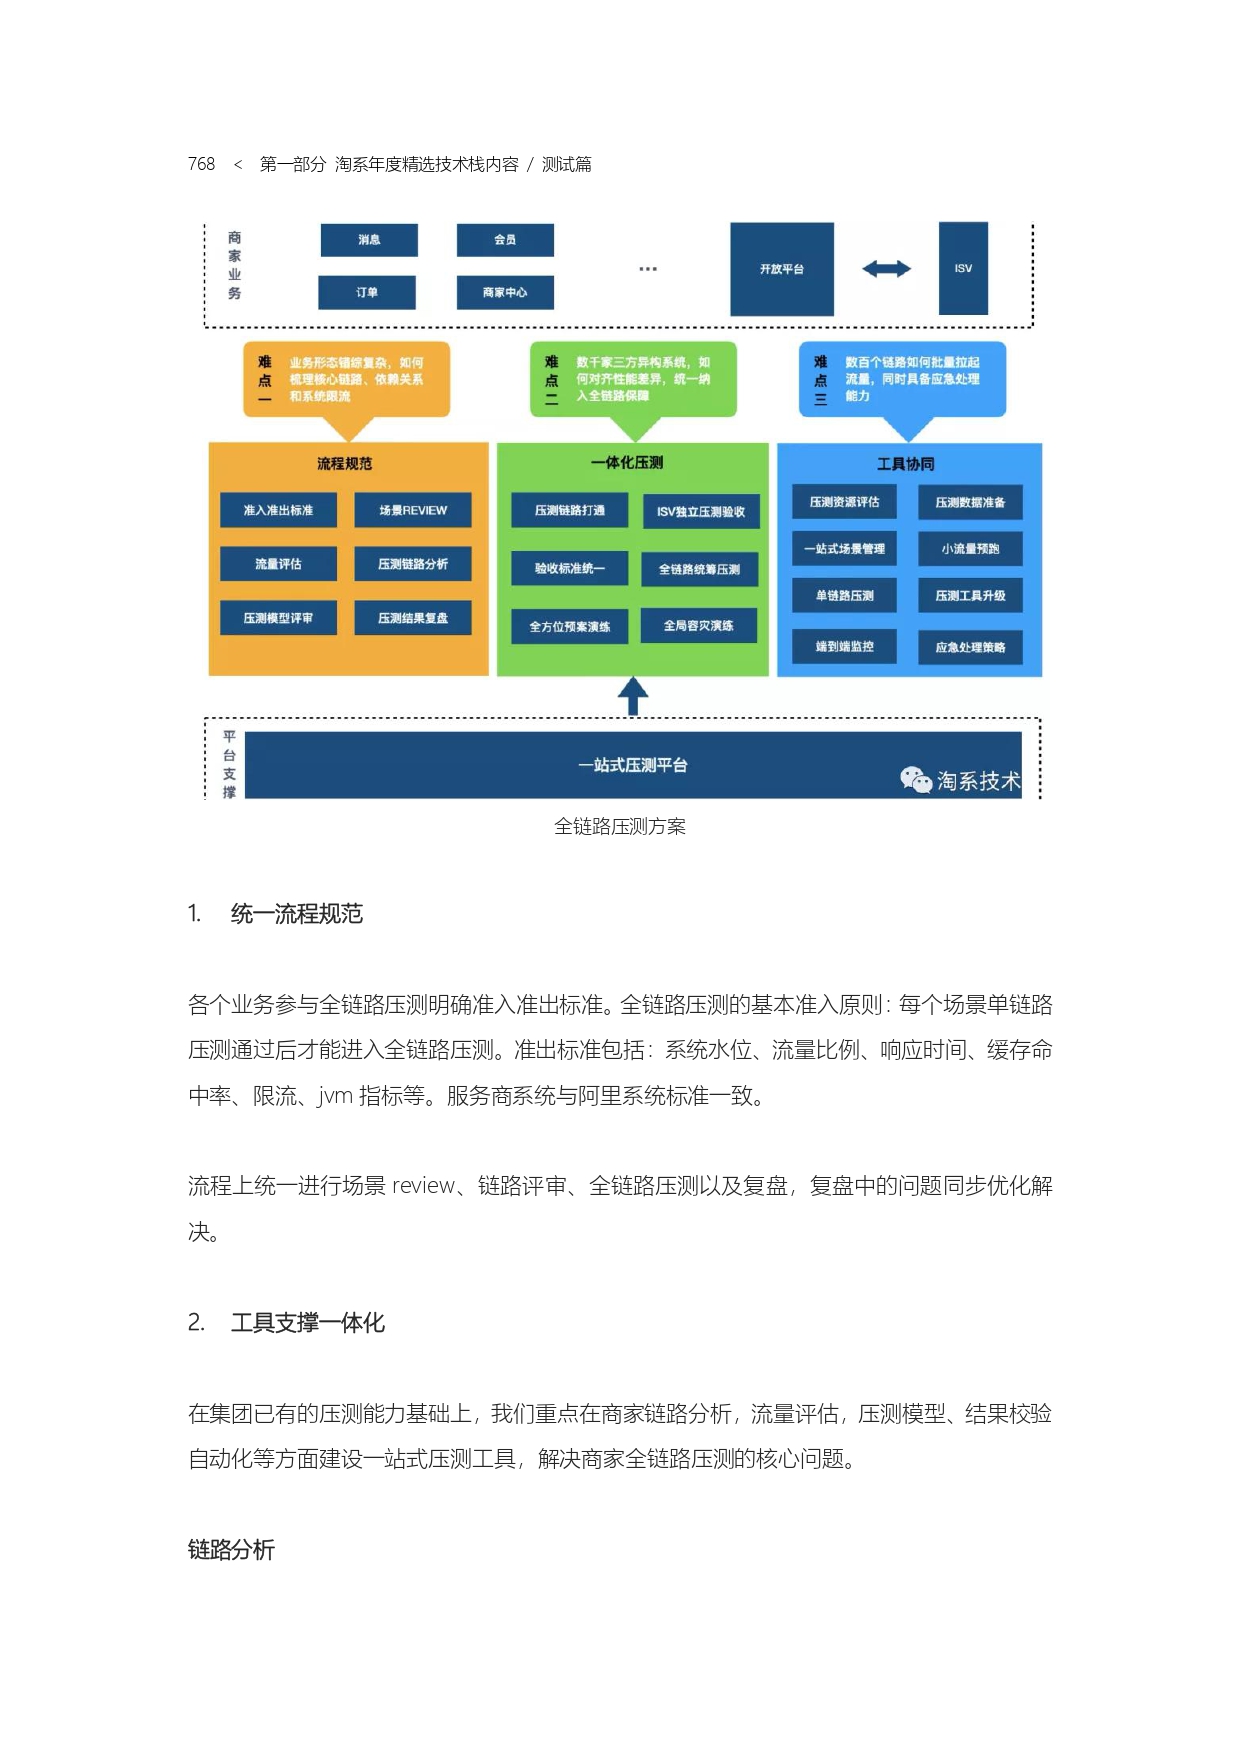 The Complete Works of Tao Technology 2020-571-1189-1-300_page-0198.jpg